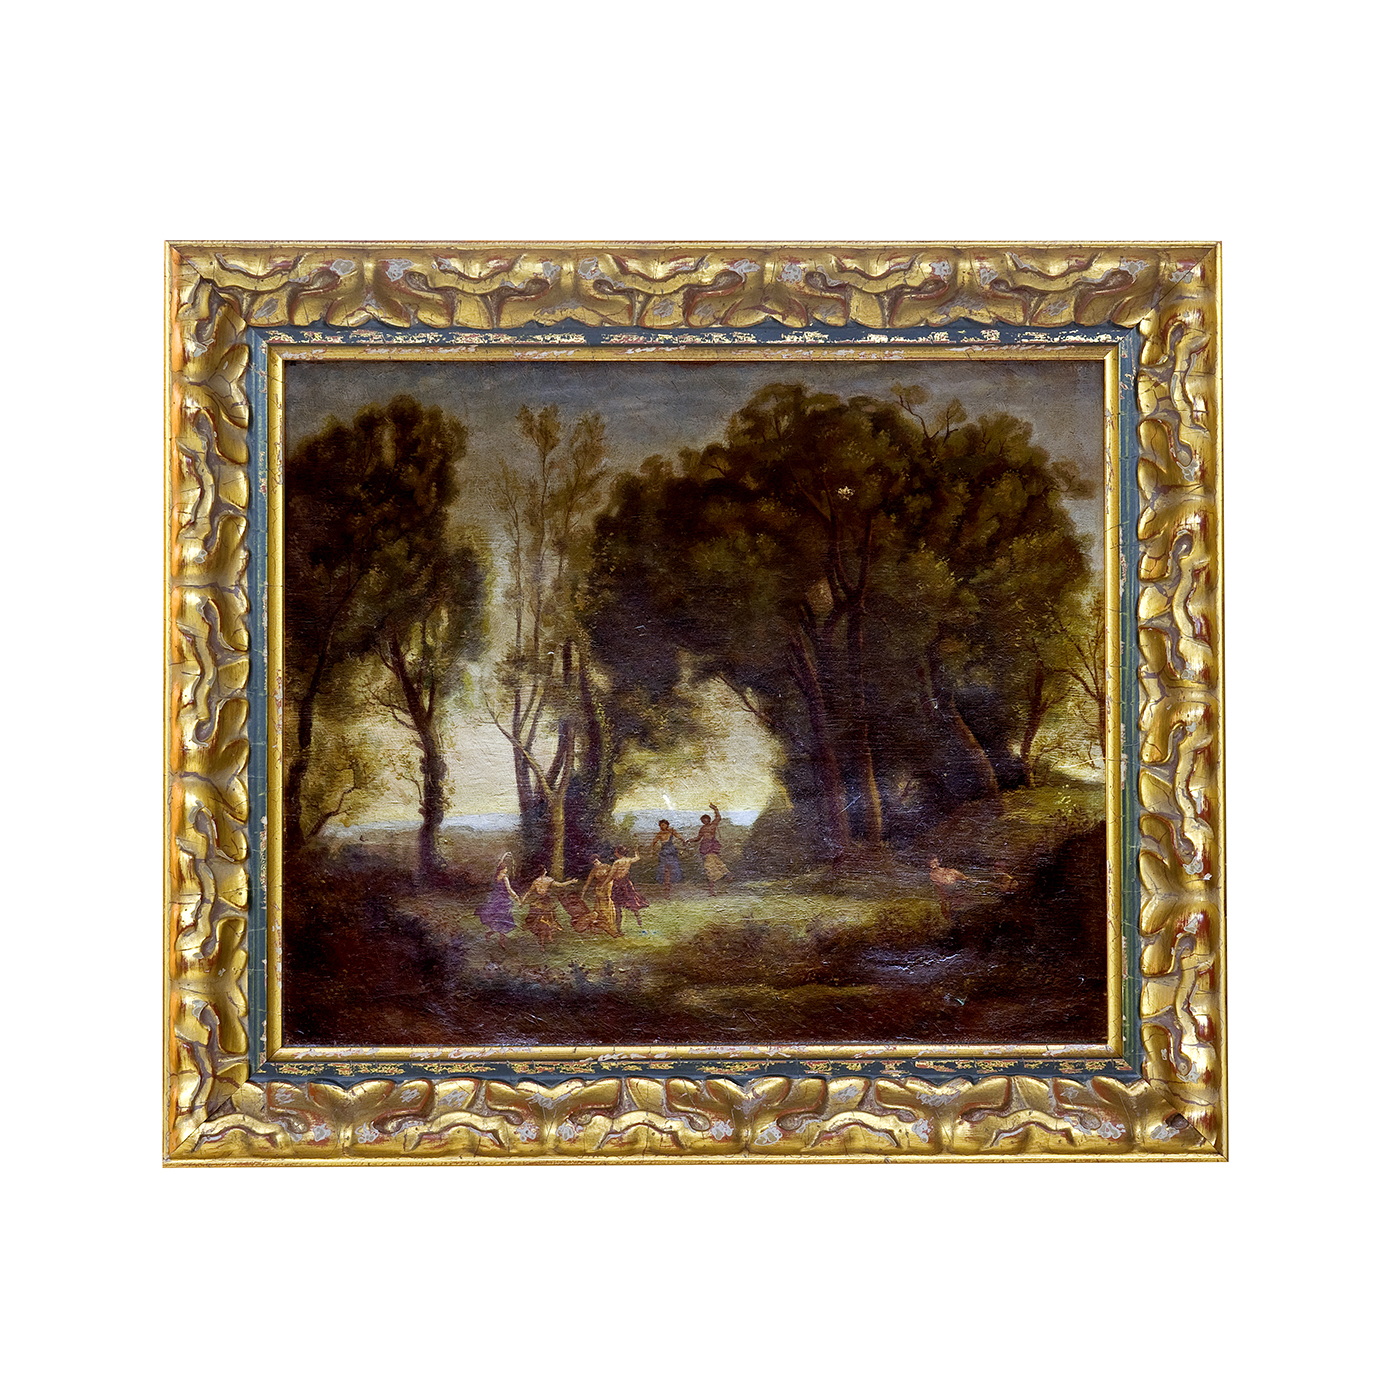 Attributed to Jean-Baptiste COROT. Oil on canvas. "Bacchanal in the forest".